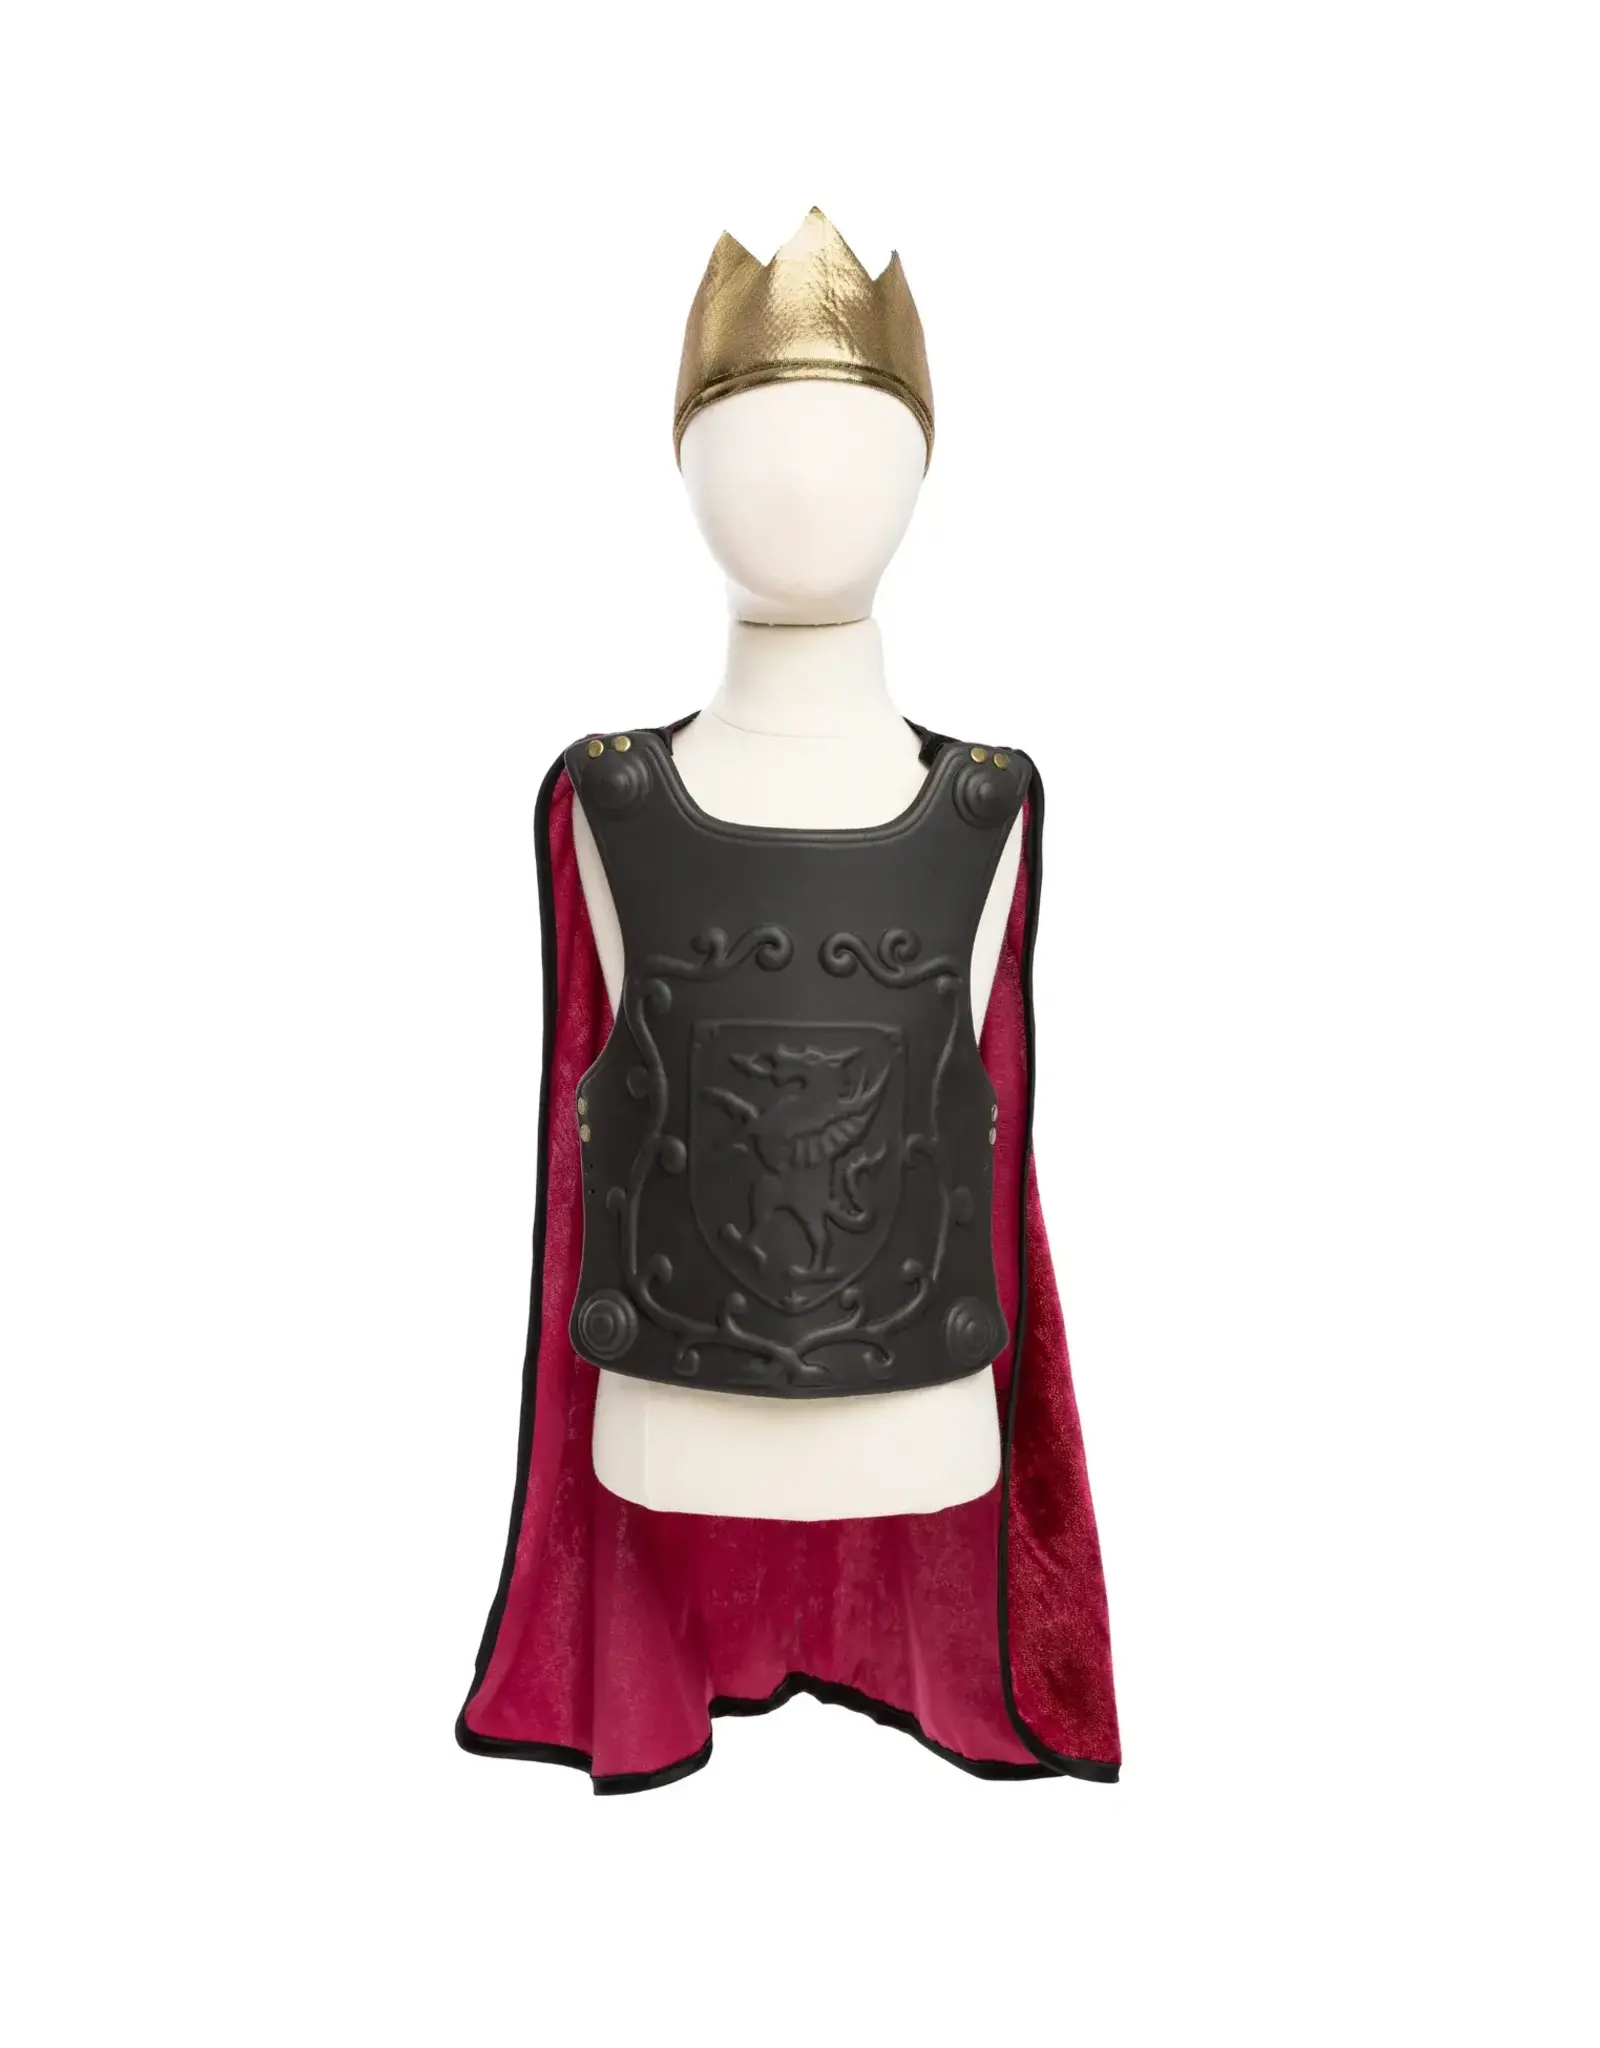 Great Pretenders Legendary Knight Cape, Chest Plate & Crown, Size 5/6